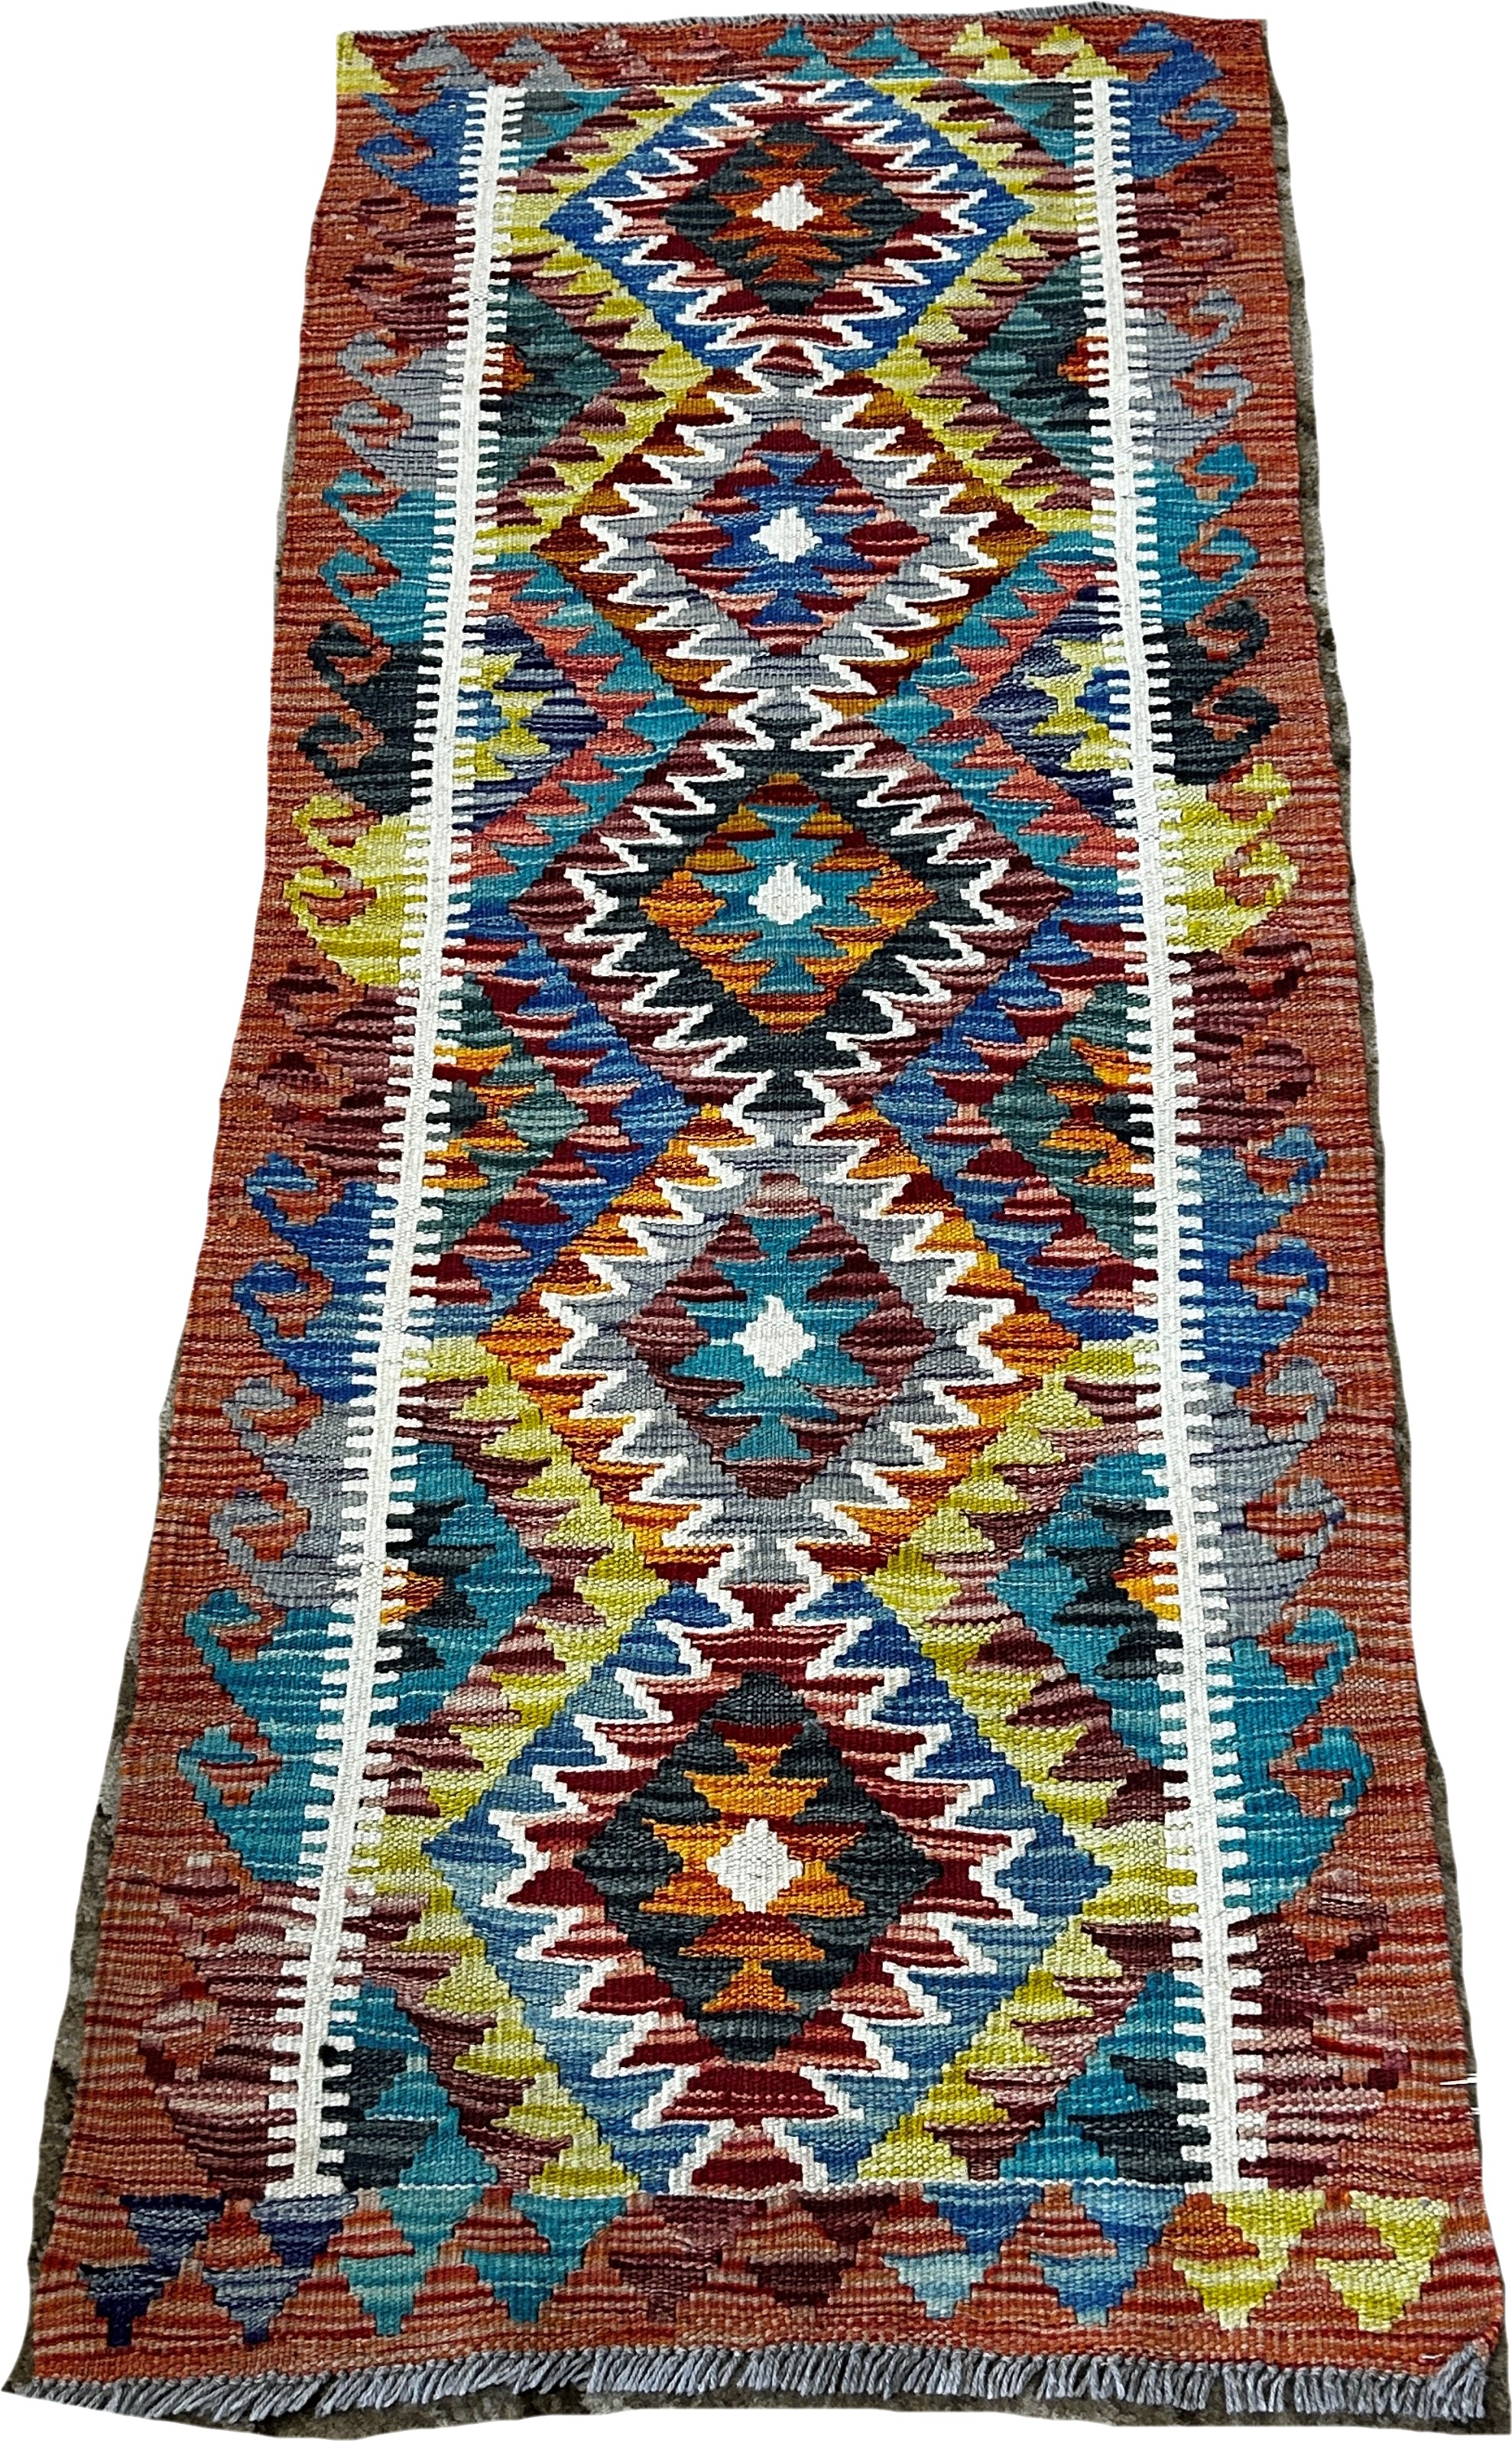 A Chobi kilim runner with five central stepped diamonds, 152 x 63cm approximately - Image 2 of 2